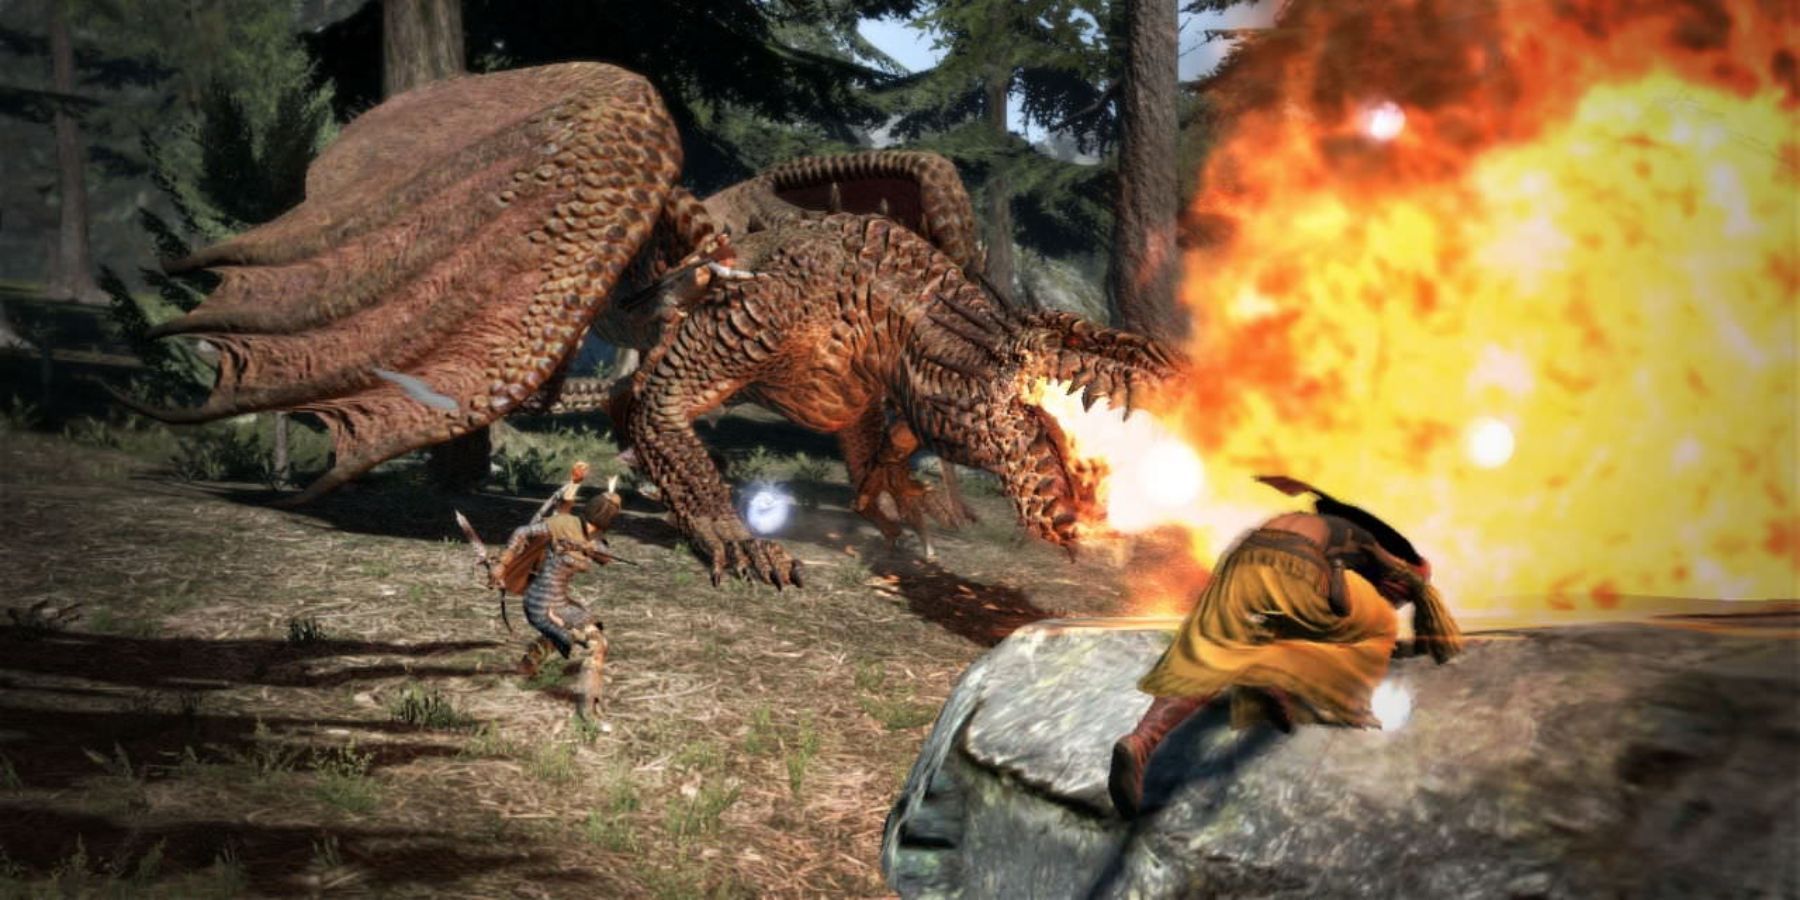 Dragon's Dogma 2: Things The Sequel Needs To Improve From The Original